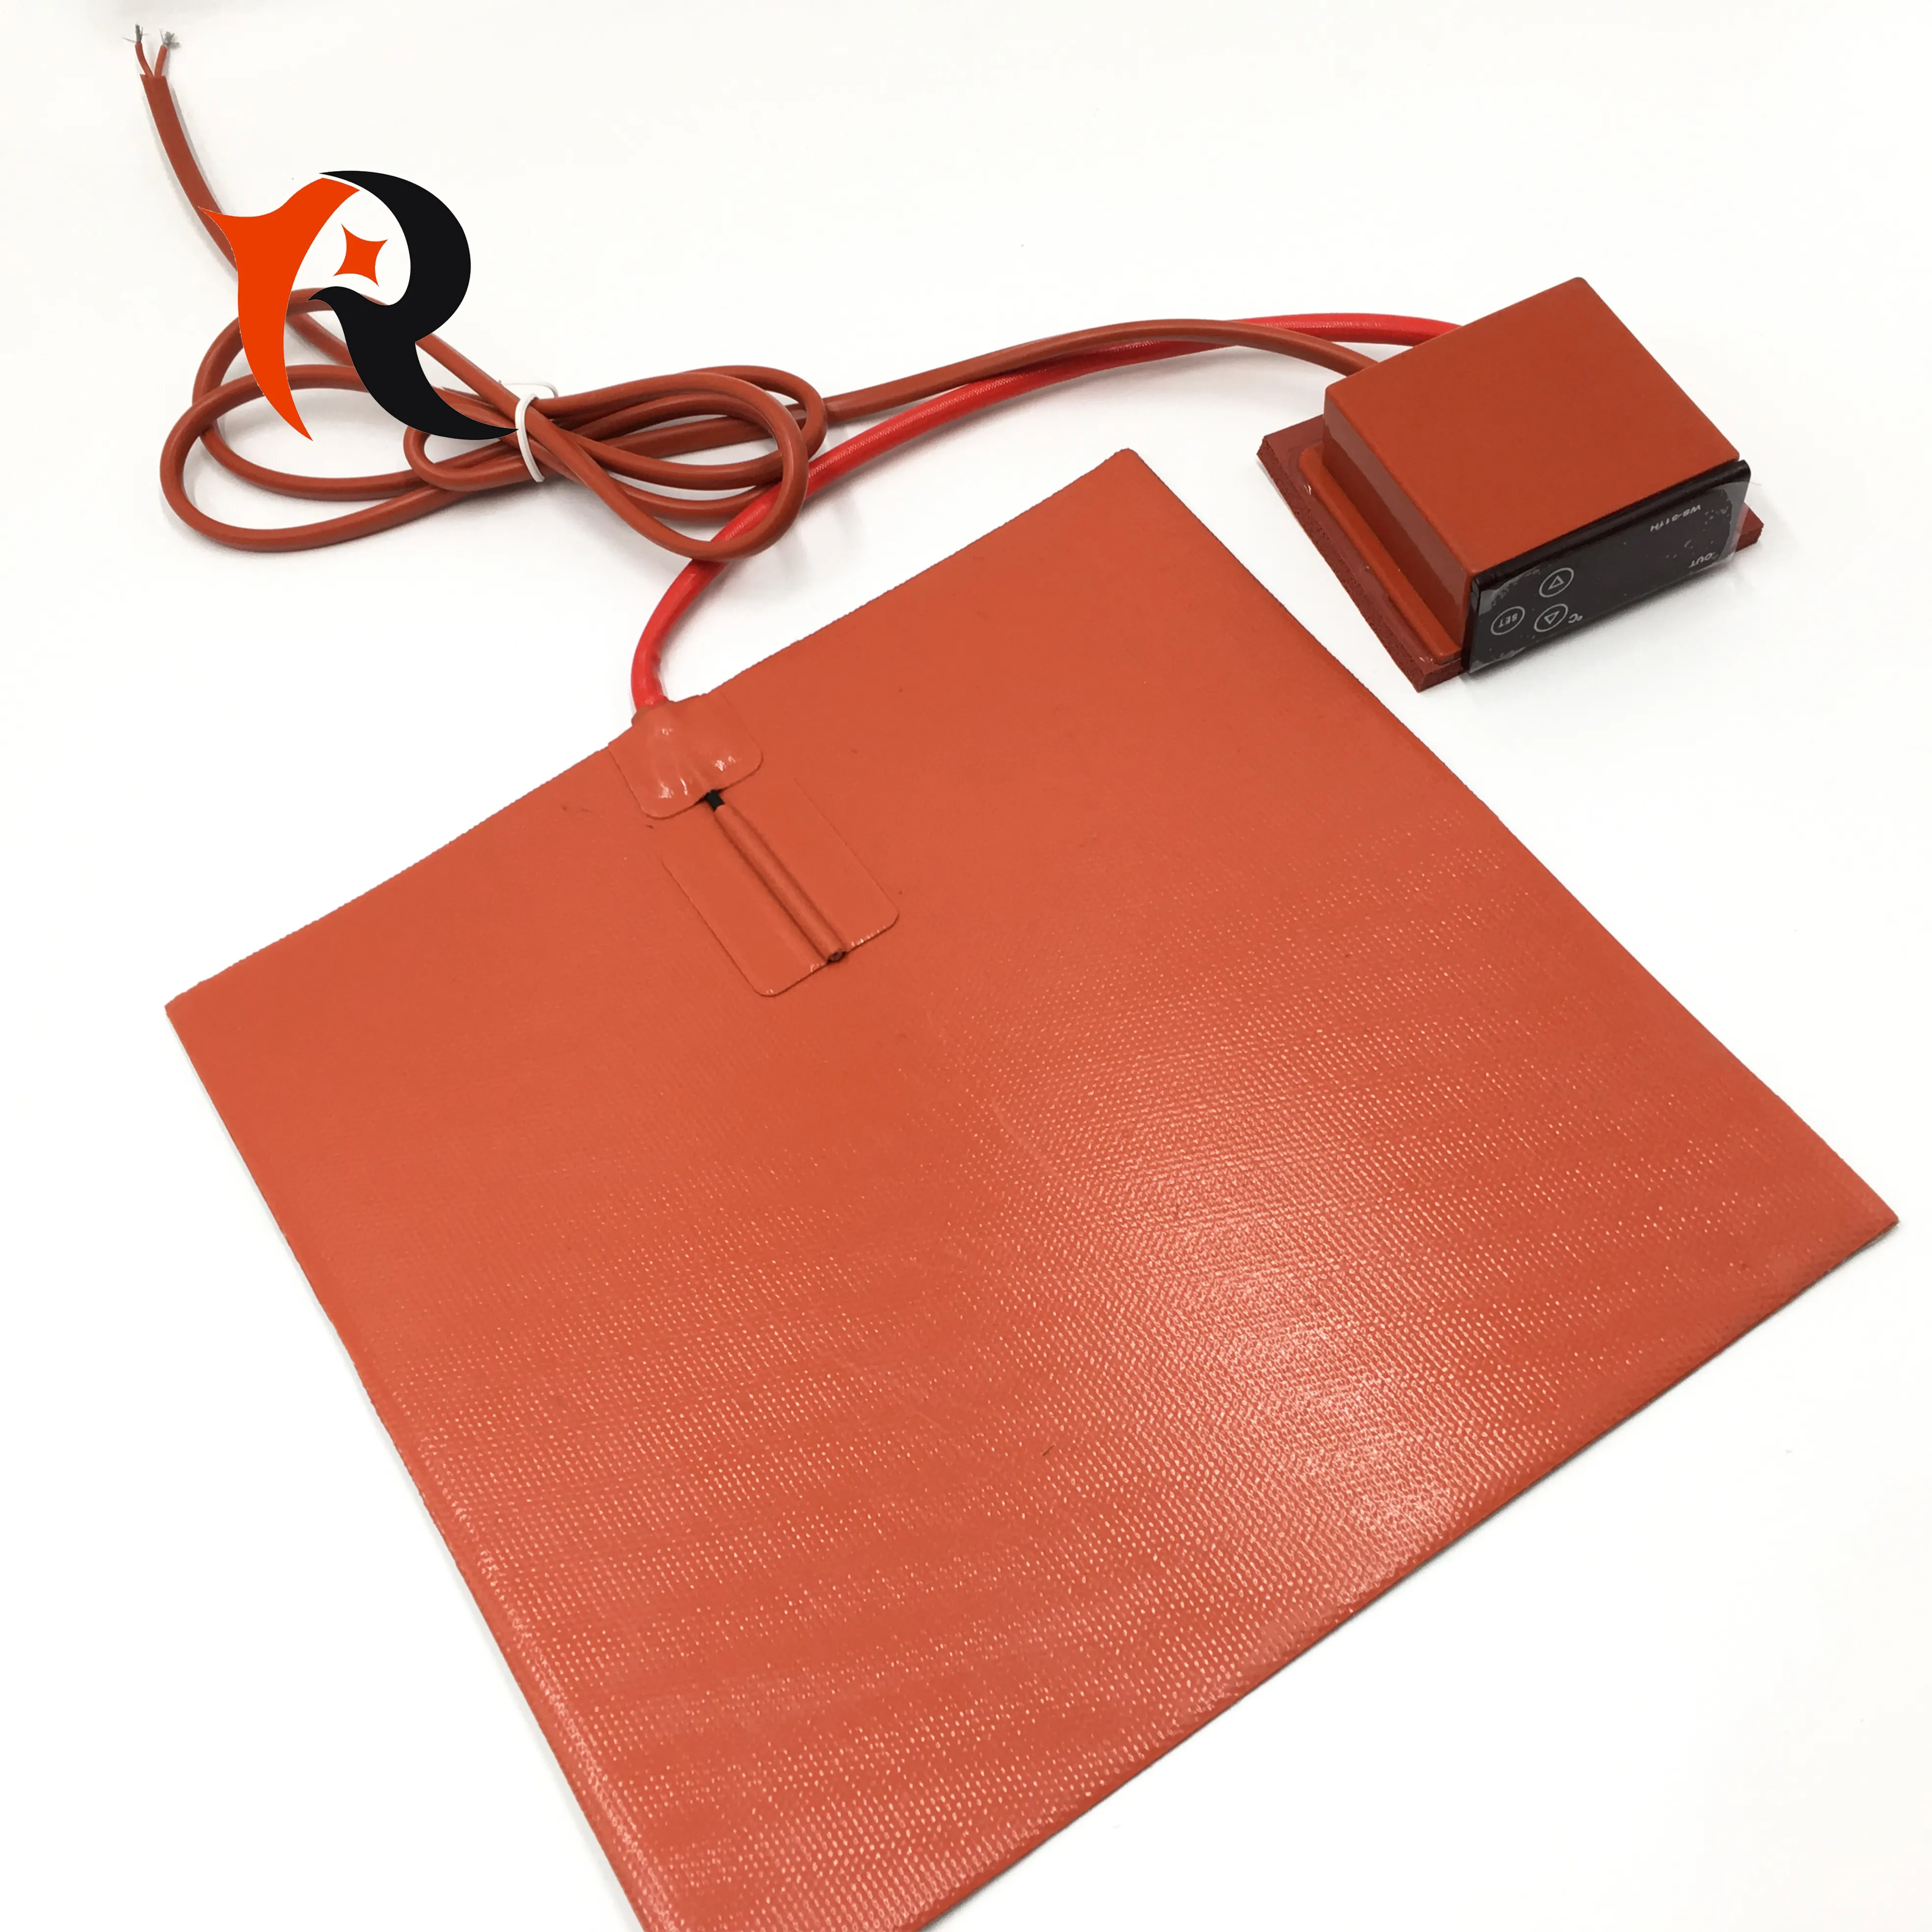 Hot sale 500W 600W heated silicon rubber pad mat plate heater with digital thermostat